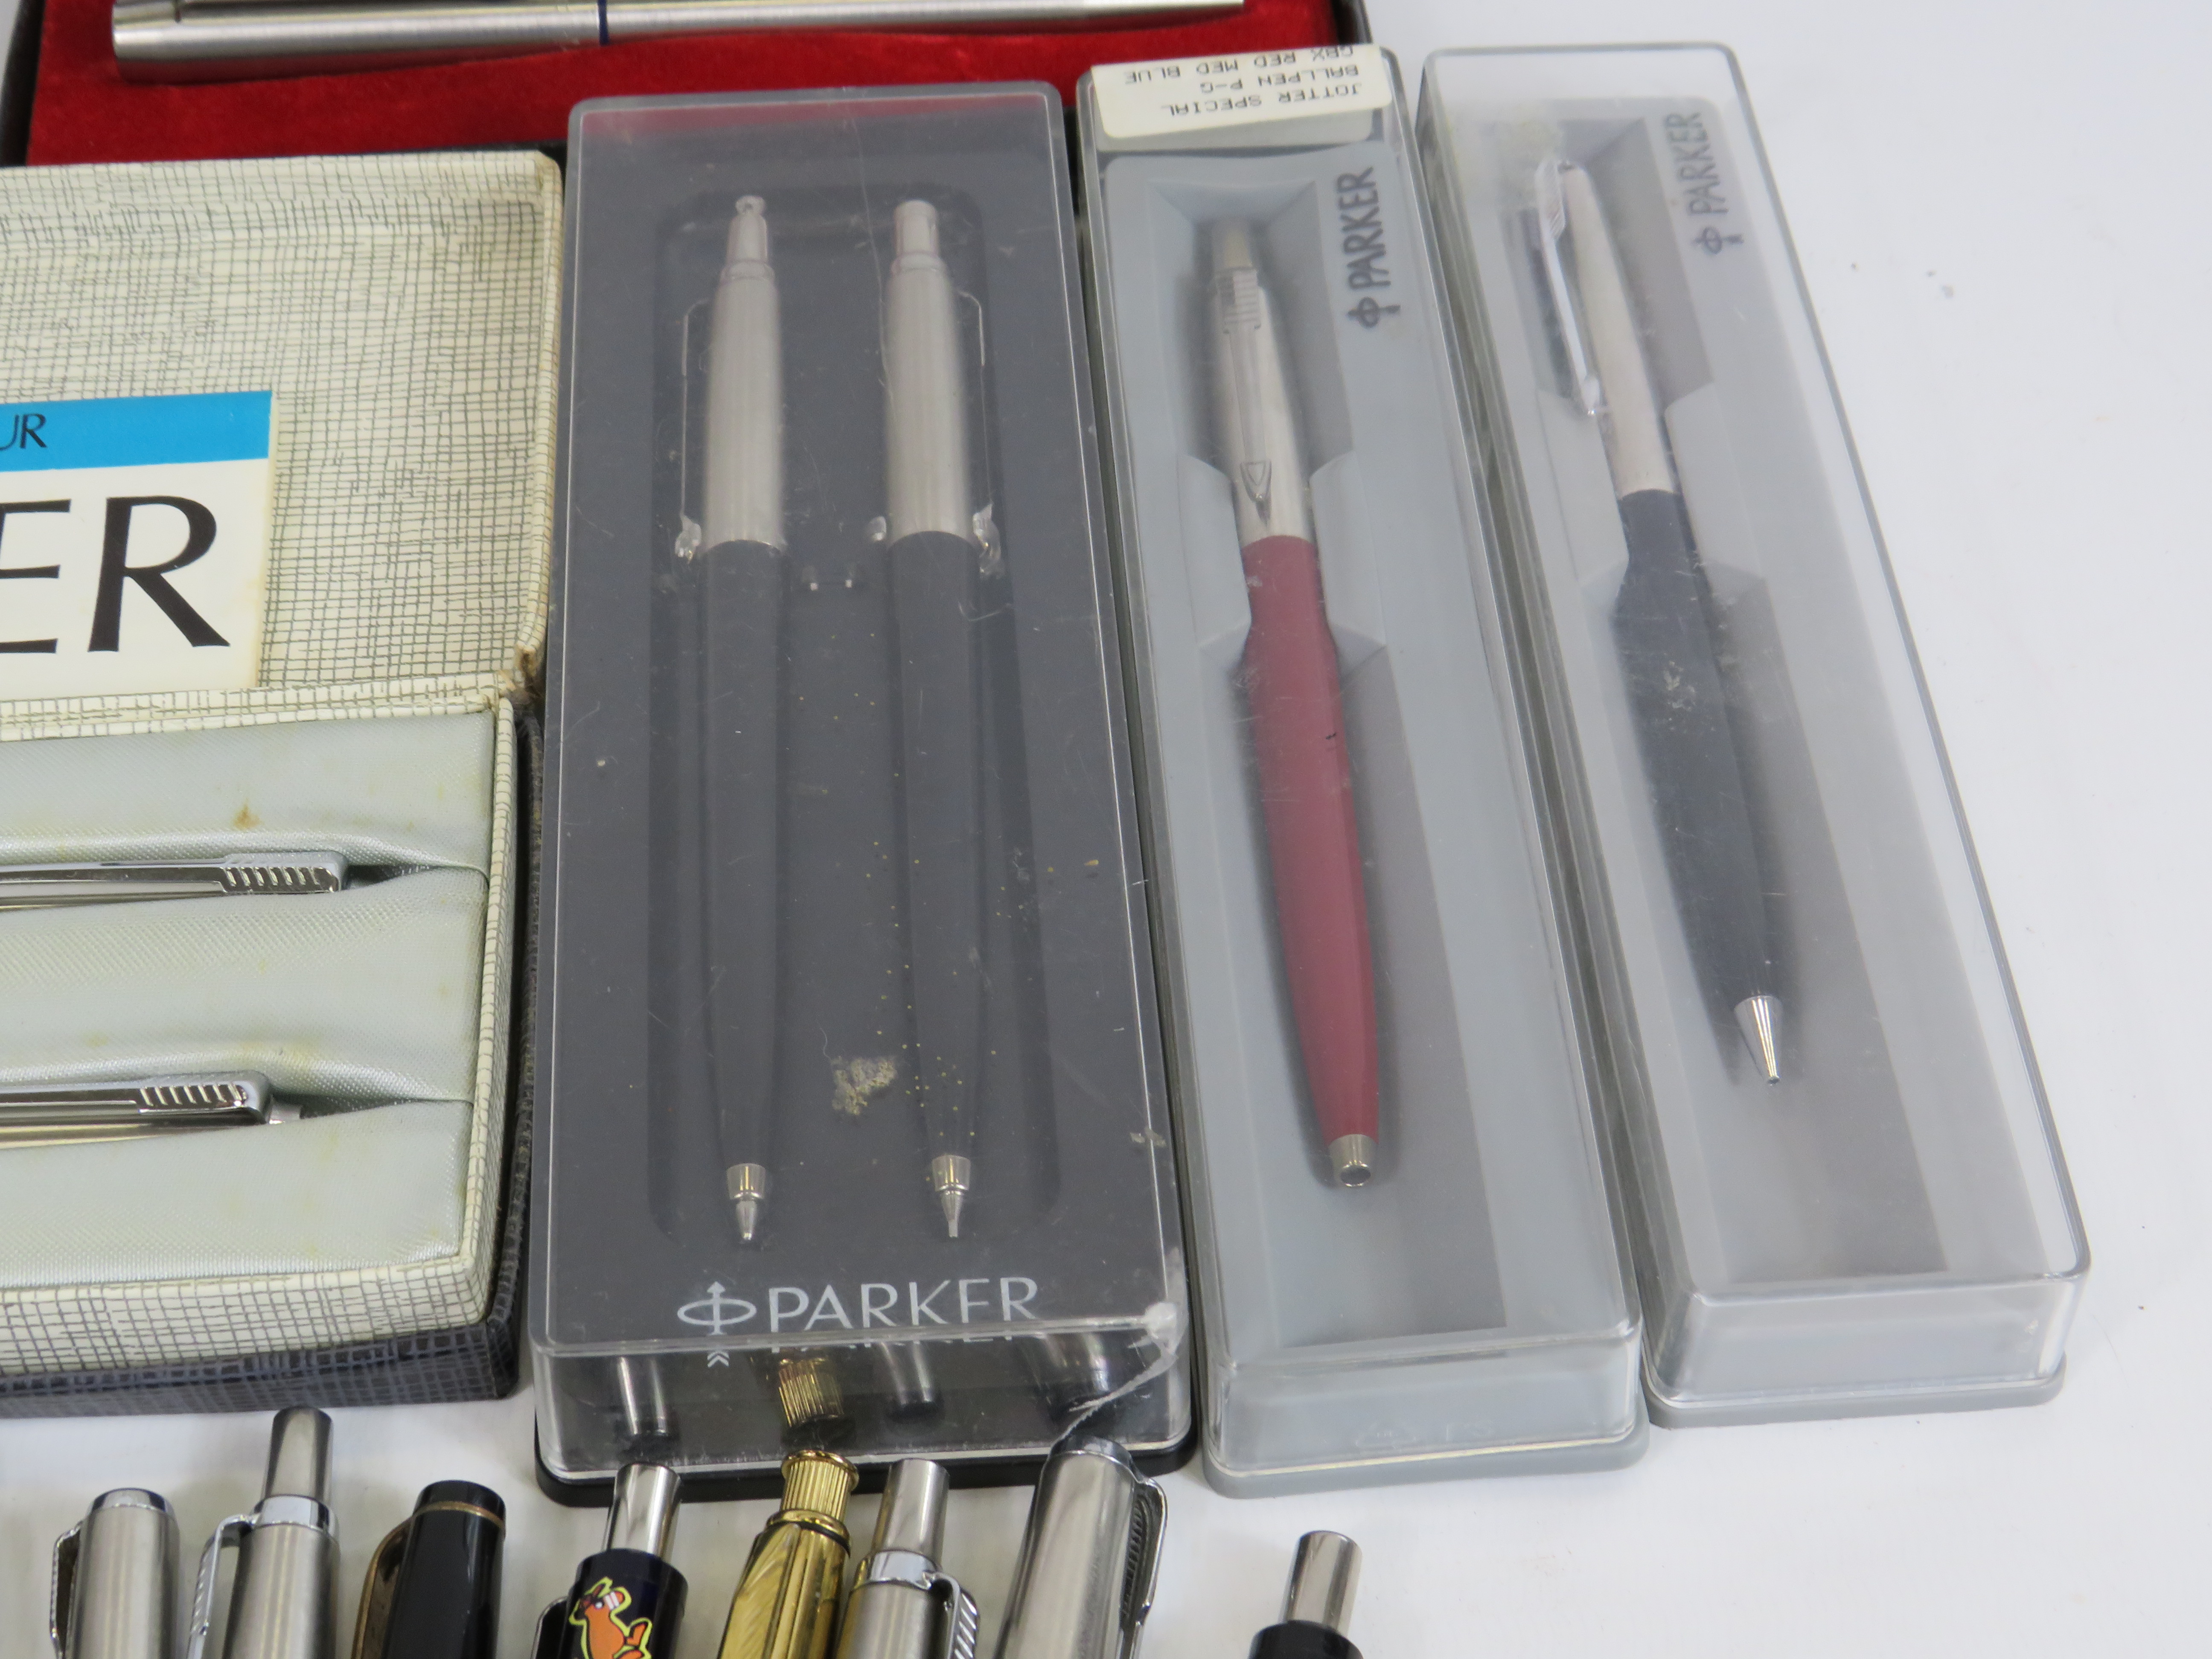 Selection of Parker ballpoint pens and pencils, some with boxes. - Image 3 of 4